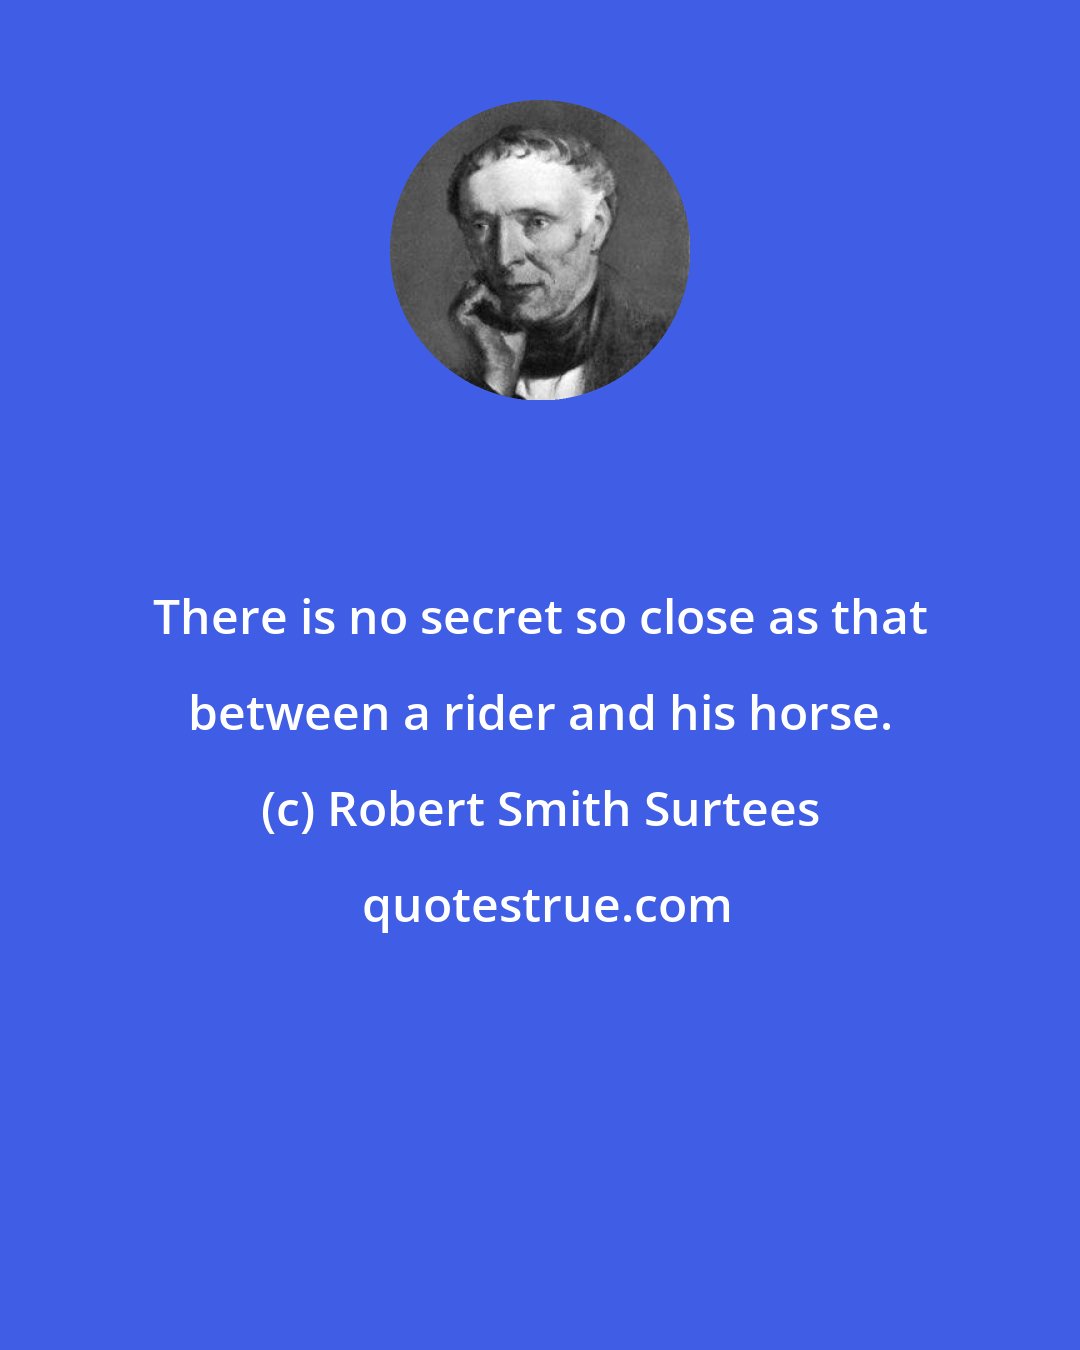 Robert Smith Surtees: There is no secret so close as that between a rider and his horse.